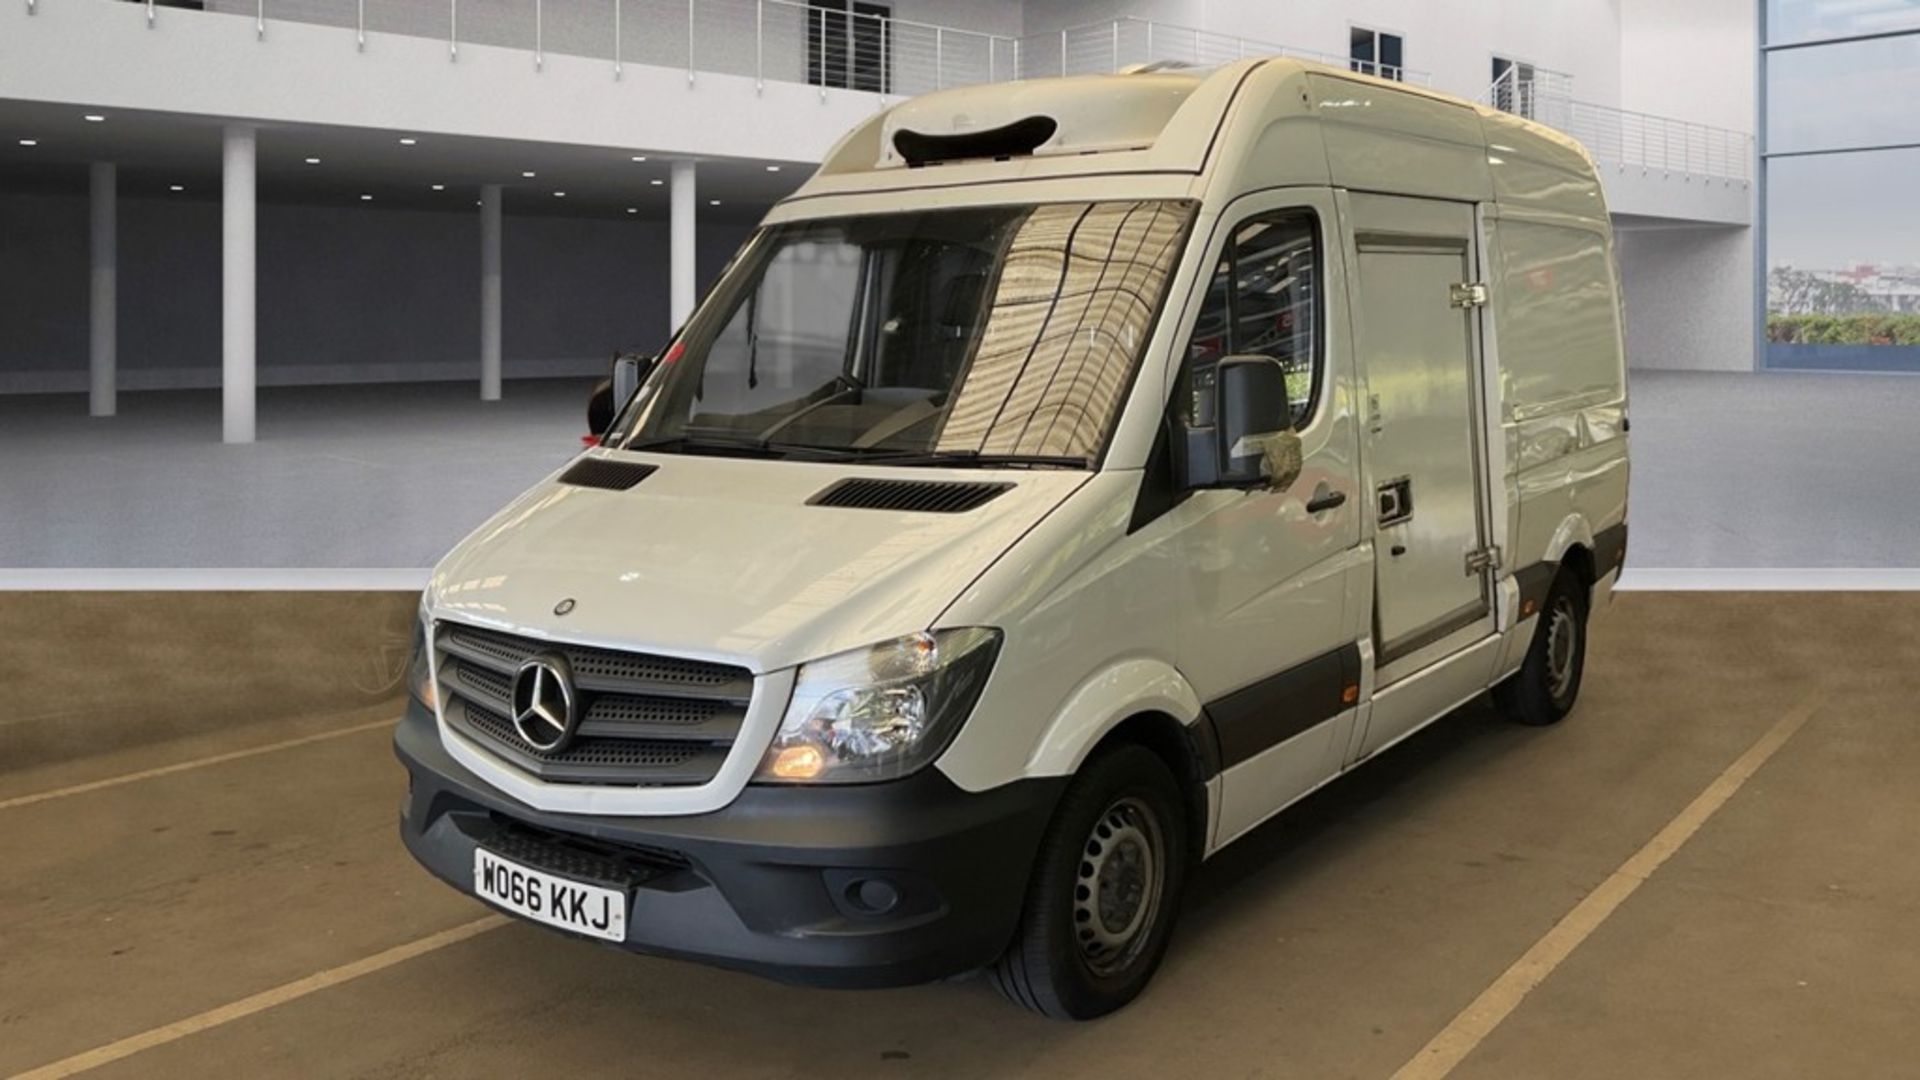 ** ON SALE ** Mercedes-Benz Sprinter 314 2.1 CDI 3.5t MWB Refrigerated 2017(66 Reg) - Image 2 of 8